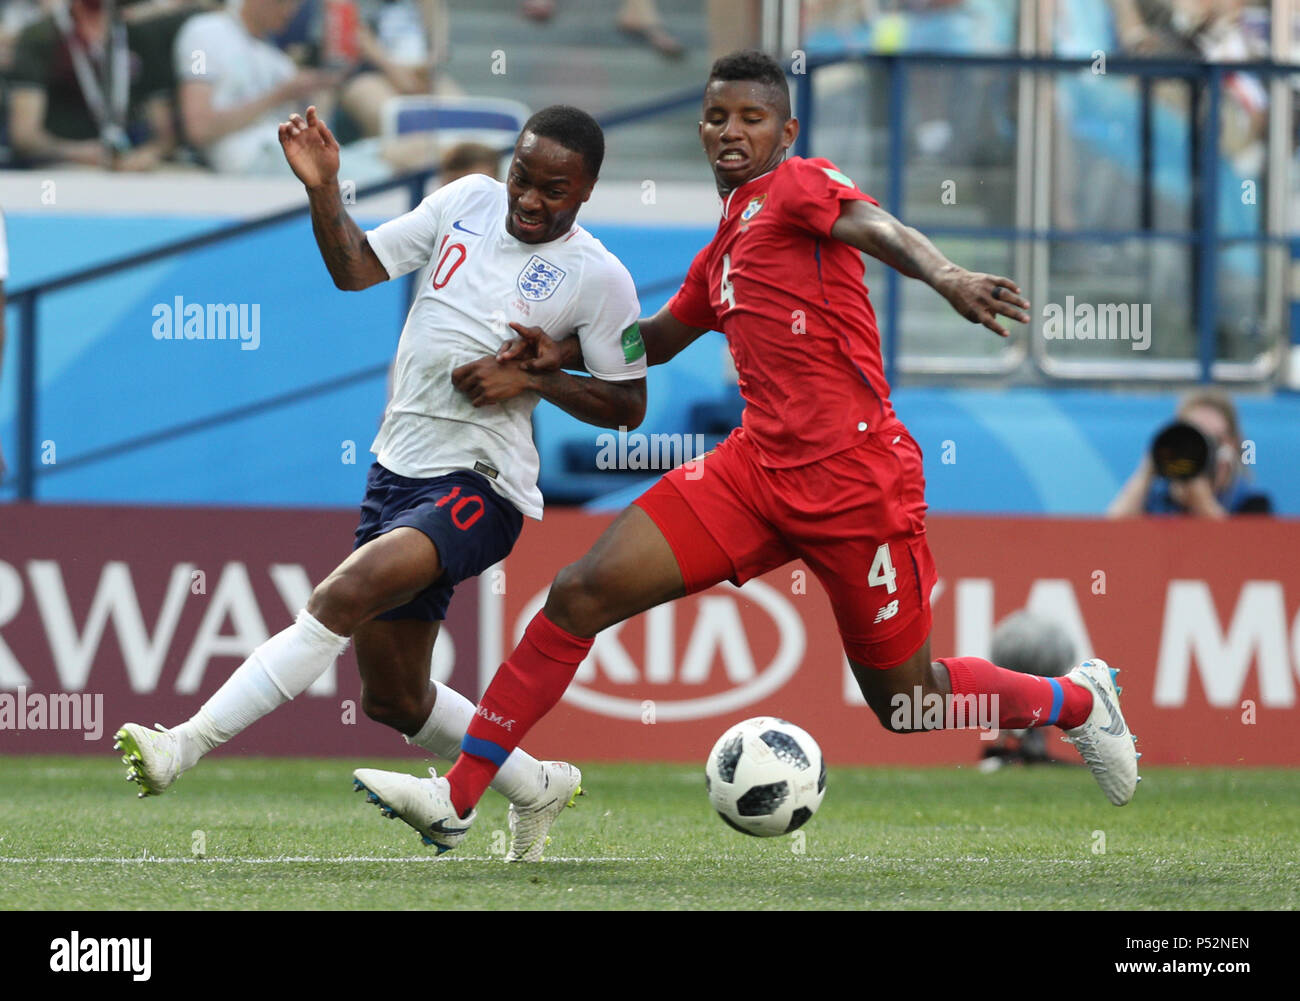 England's Raheem Sterling (left) and Panama's Fidel Escobar battle for the ball during the FIFA World Cup Group G match at the Nizhny Novgorod Stadium. Stock Photo